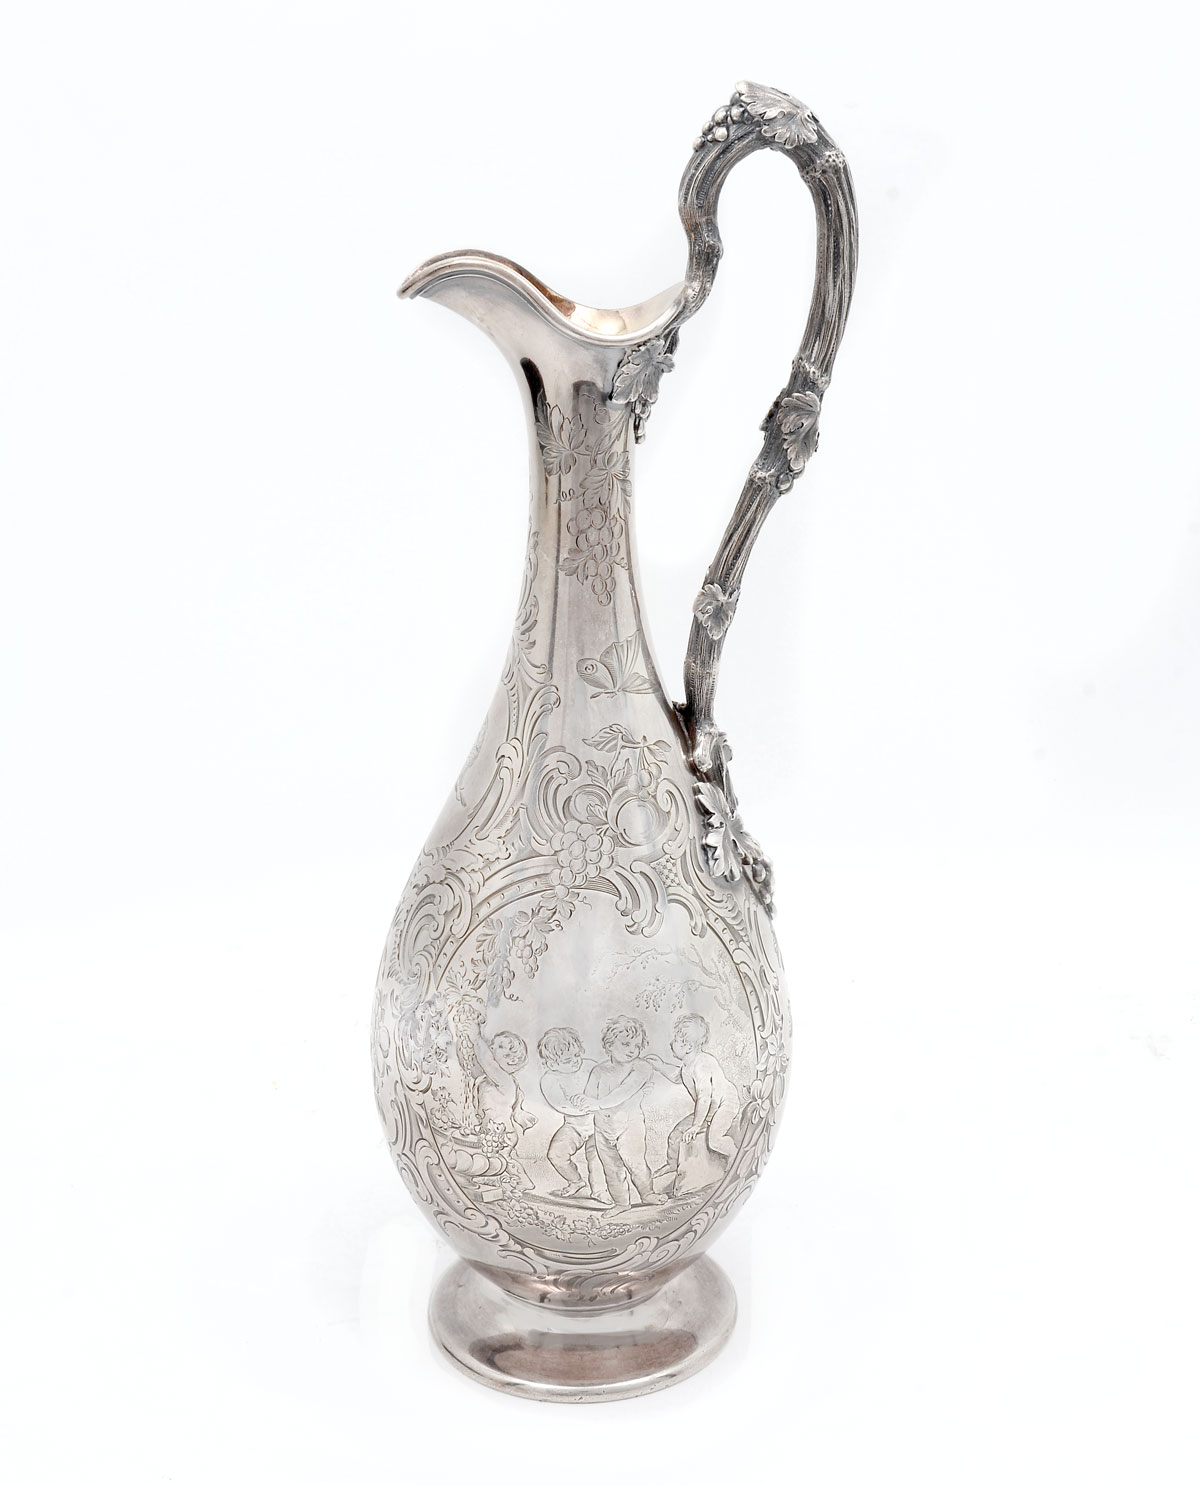 ENGLISH STERLING SILVER WINE DECANTER: